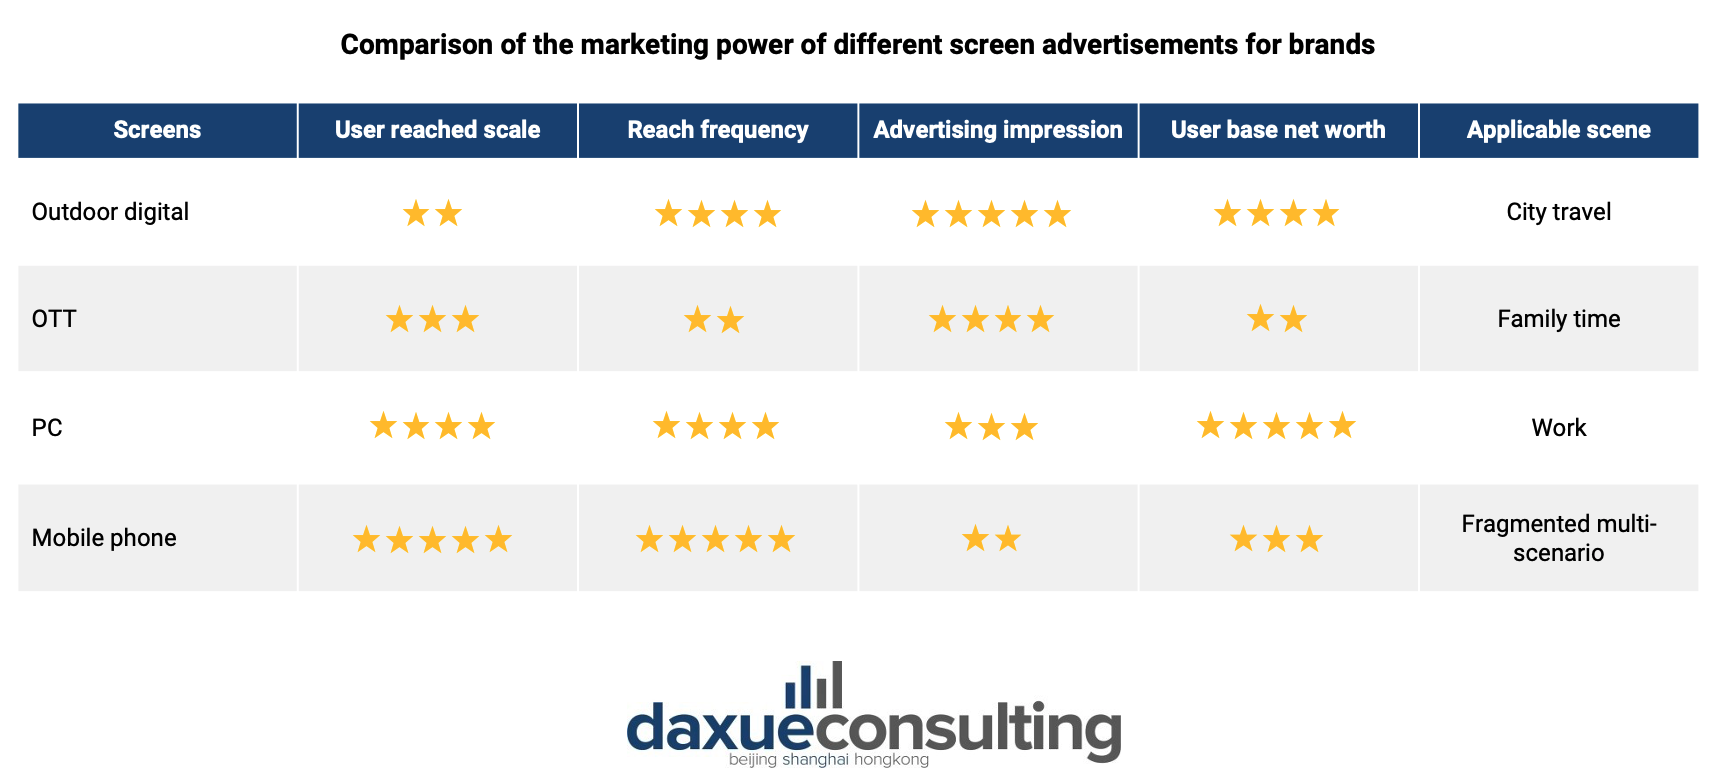 Comparison of the marketing power of different screen advertisements for brands